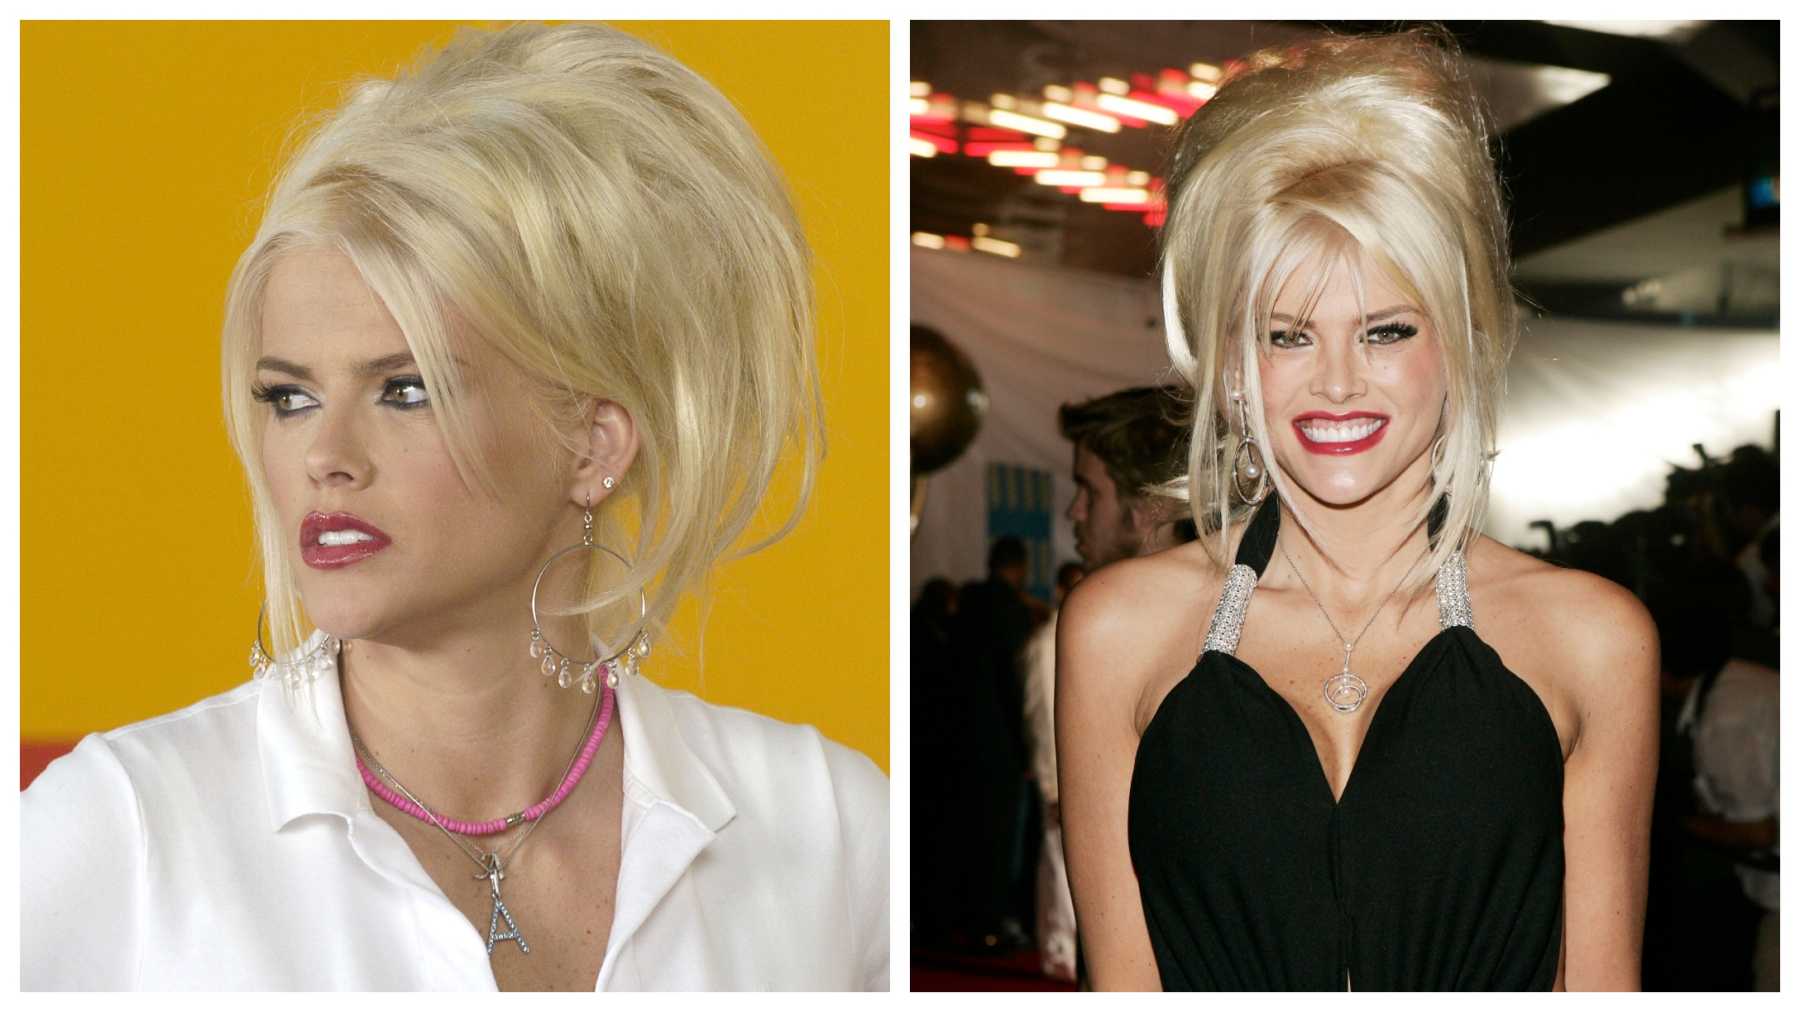 What You Might Not Know About Anna Nicole Smith | LittleThings.com